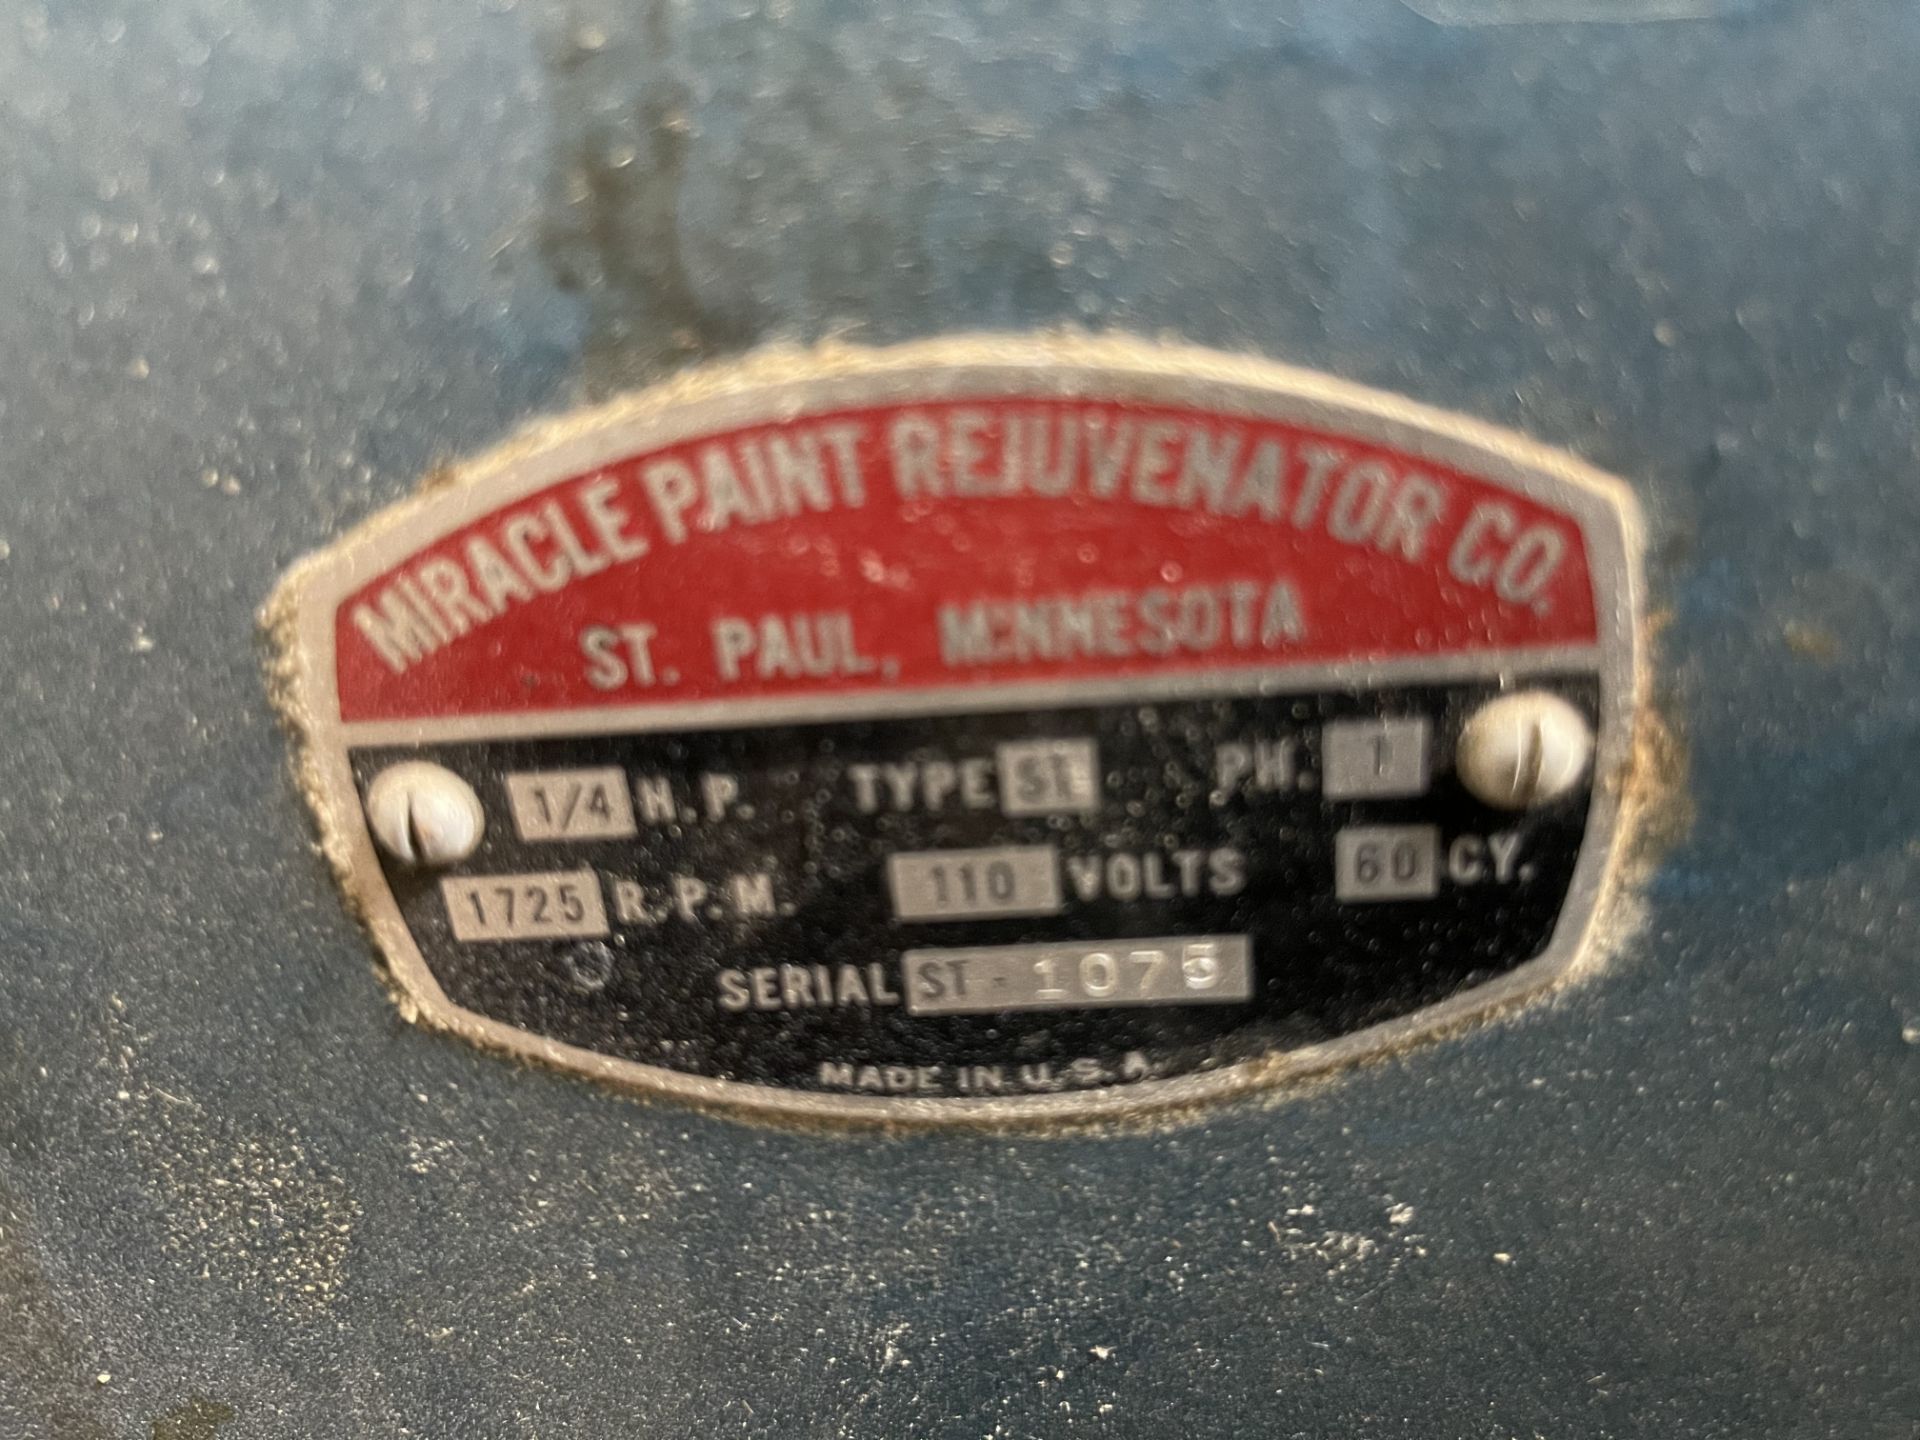 MIRACLE PAINT SHAKER, MOUNTED ON WORKSHOP TABLE AND DRAWERS, TYPE ST, 1725 RPM, S/N ST-1075 (Non- - Image 8 of 13